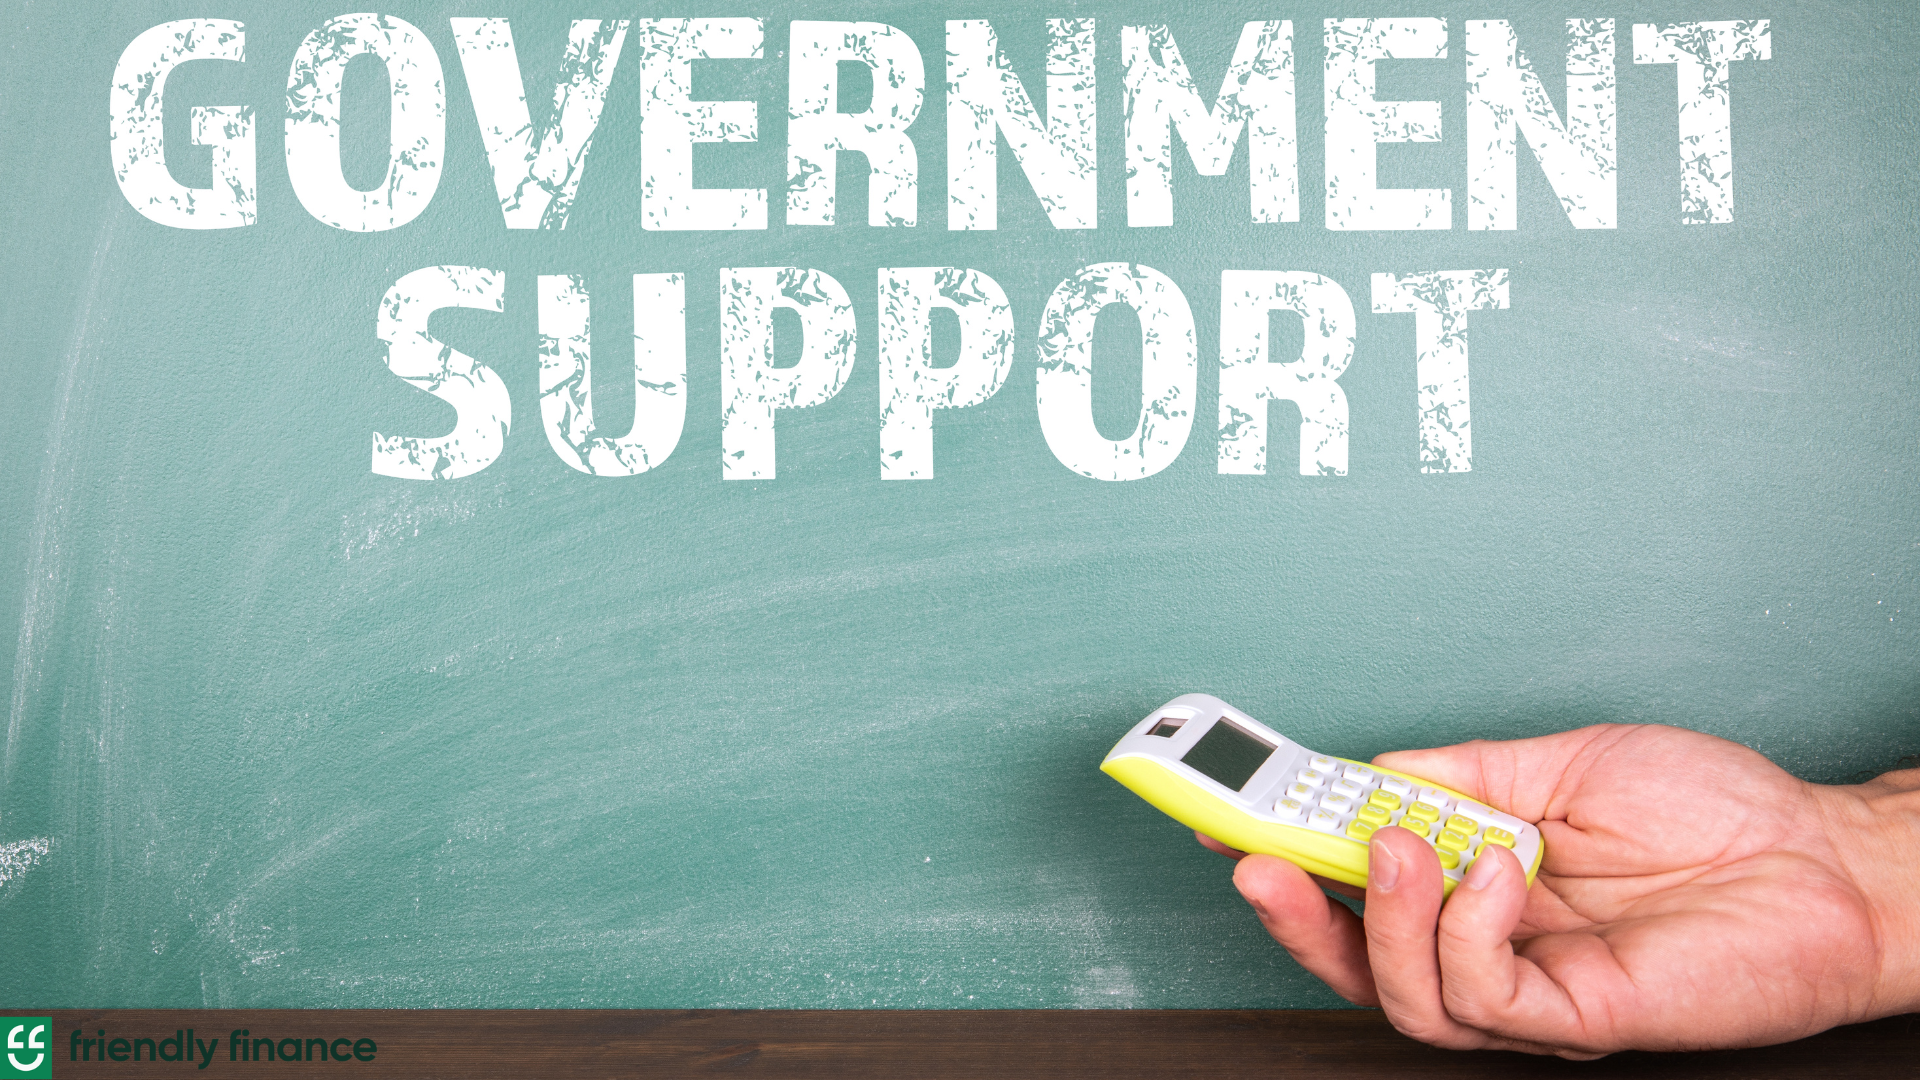 a chalk board with the words "Government Support" written; a visible hand holding a calculator is rested below